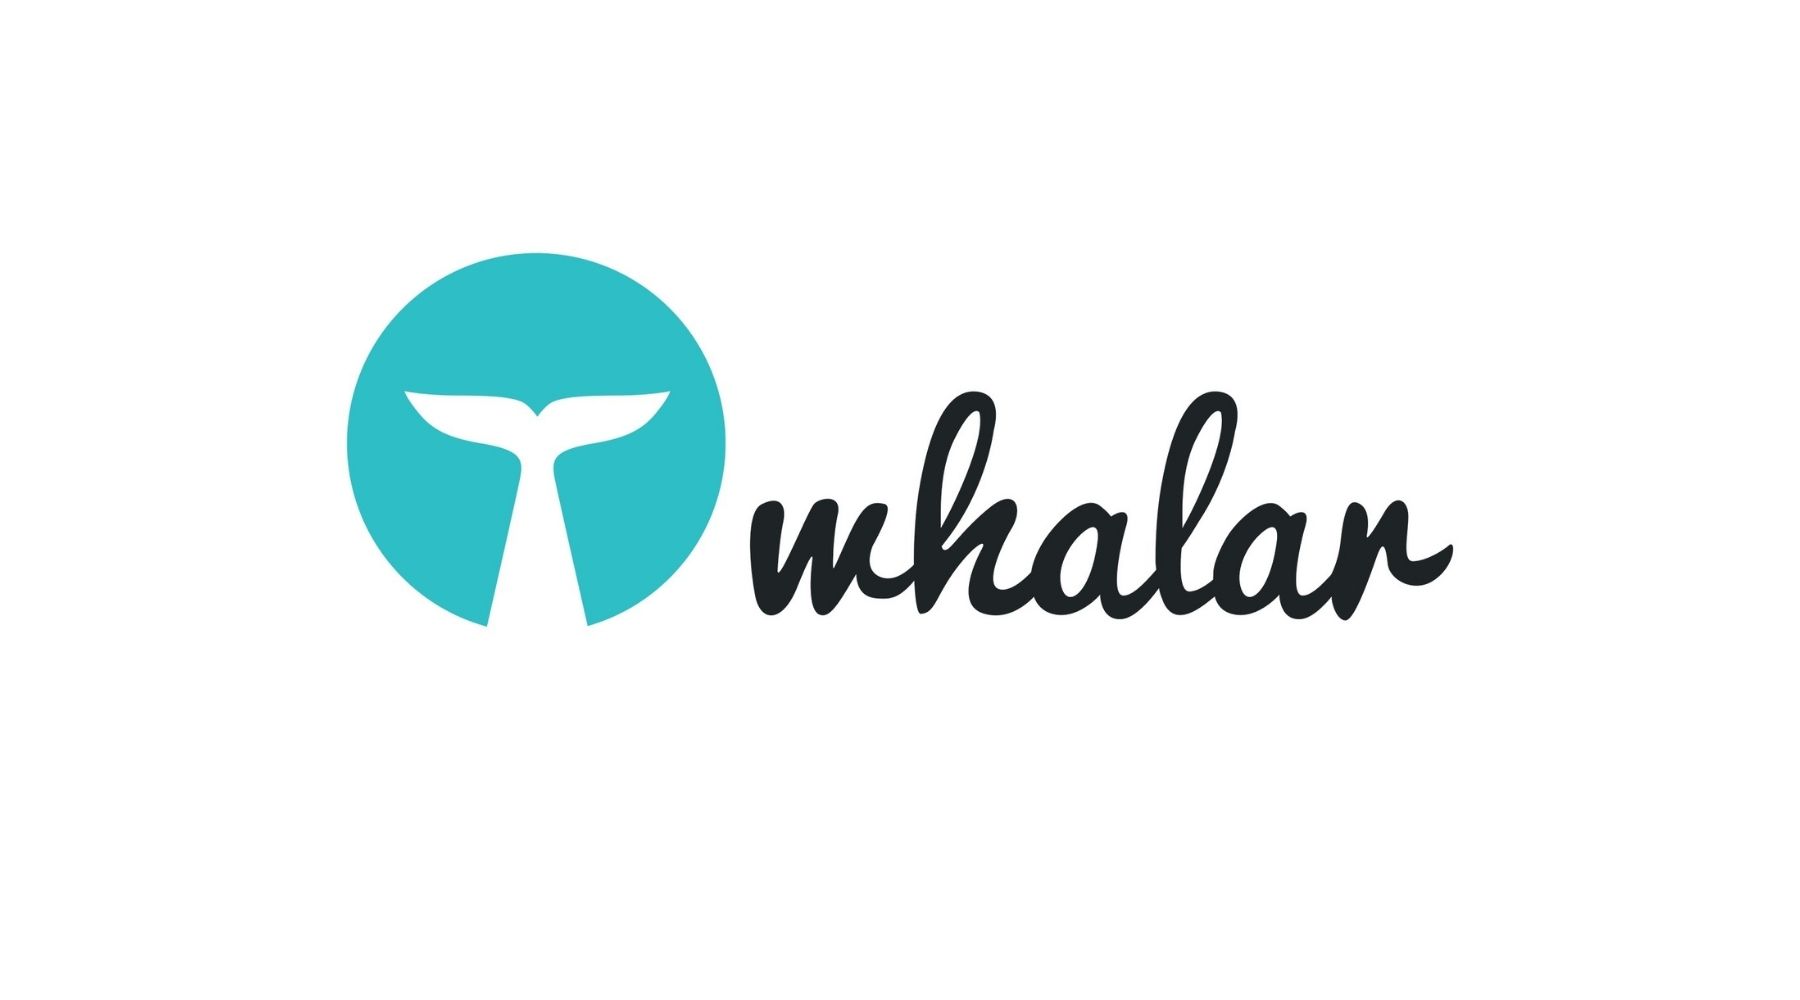 Creator Commerce Company Whalar Announces Opening of MENA Office